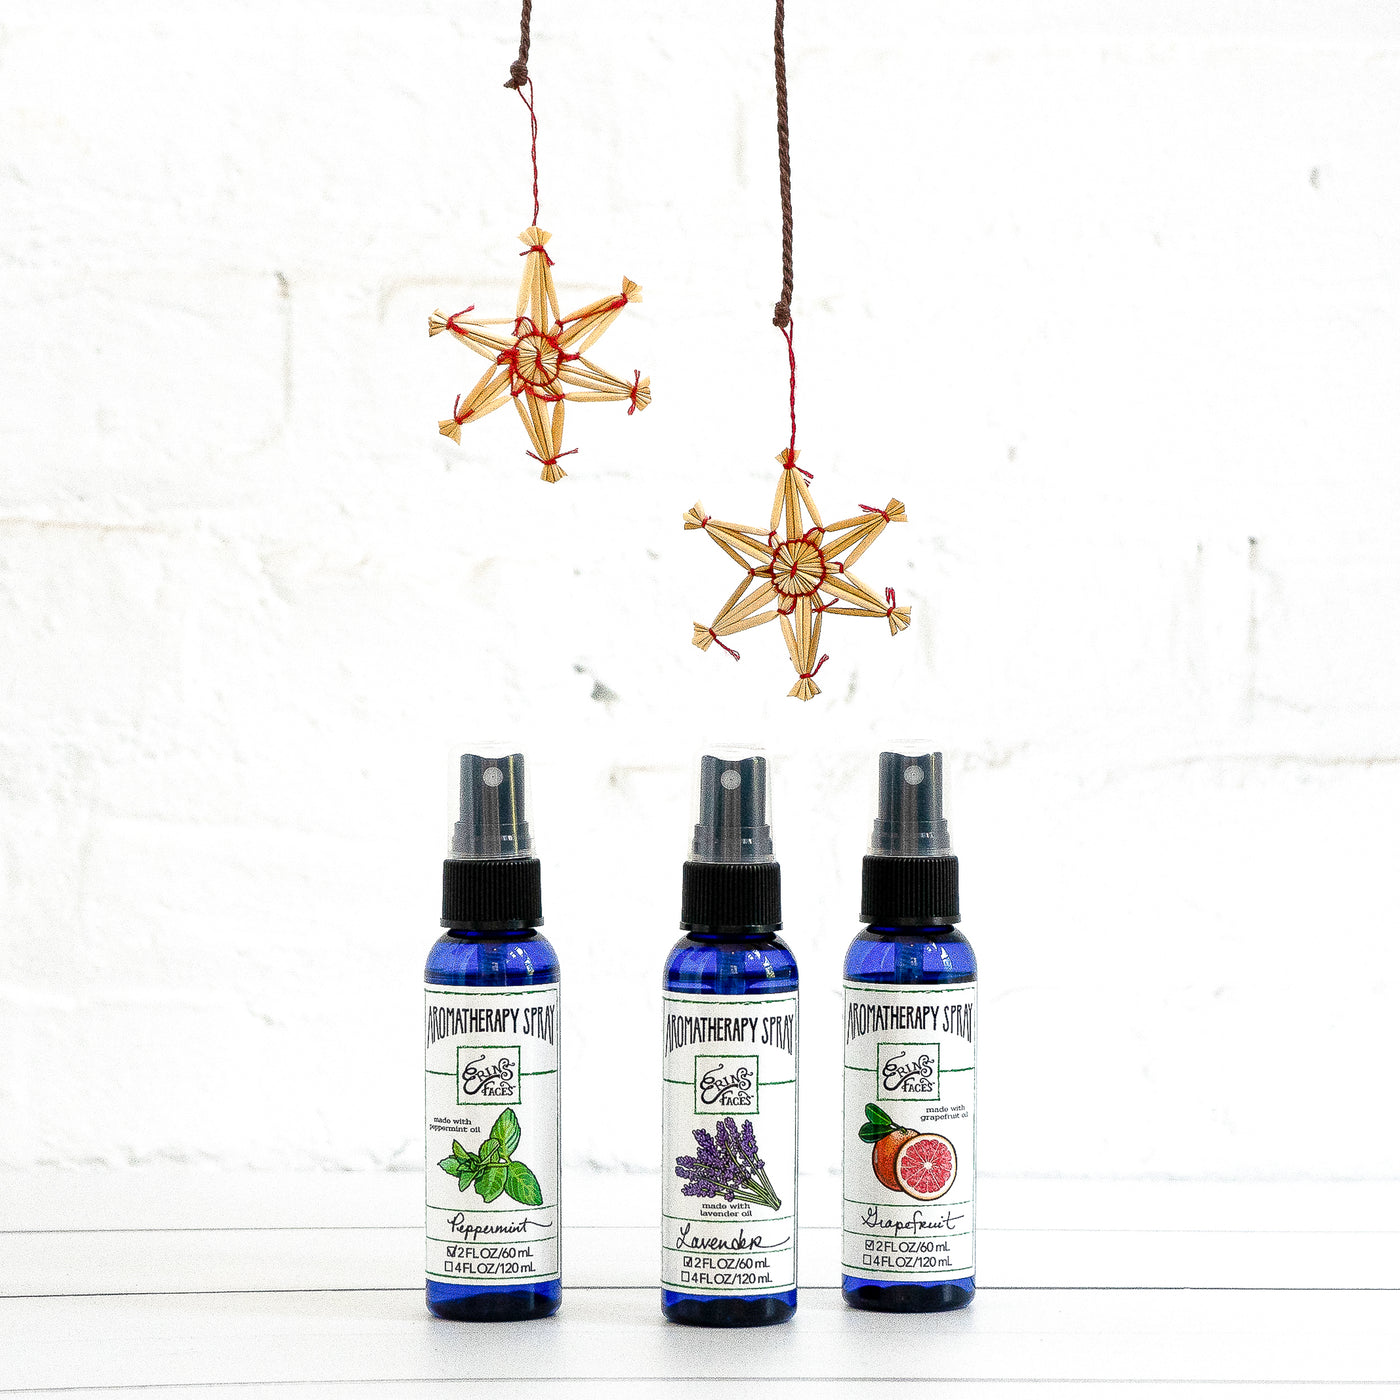 Blue plastic bottles of Erin's Faces Aromatherapy Sprays  of Peppermint, Lavender and Grapefruit with straw ornaments on a white brick background